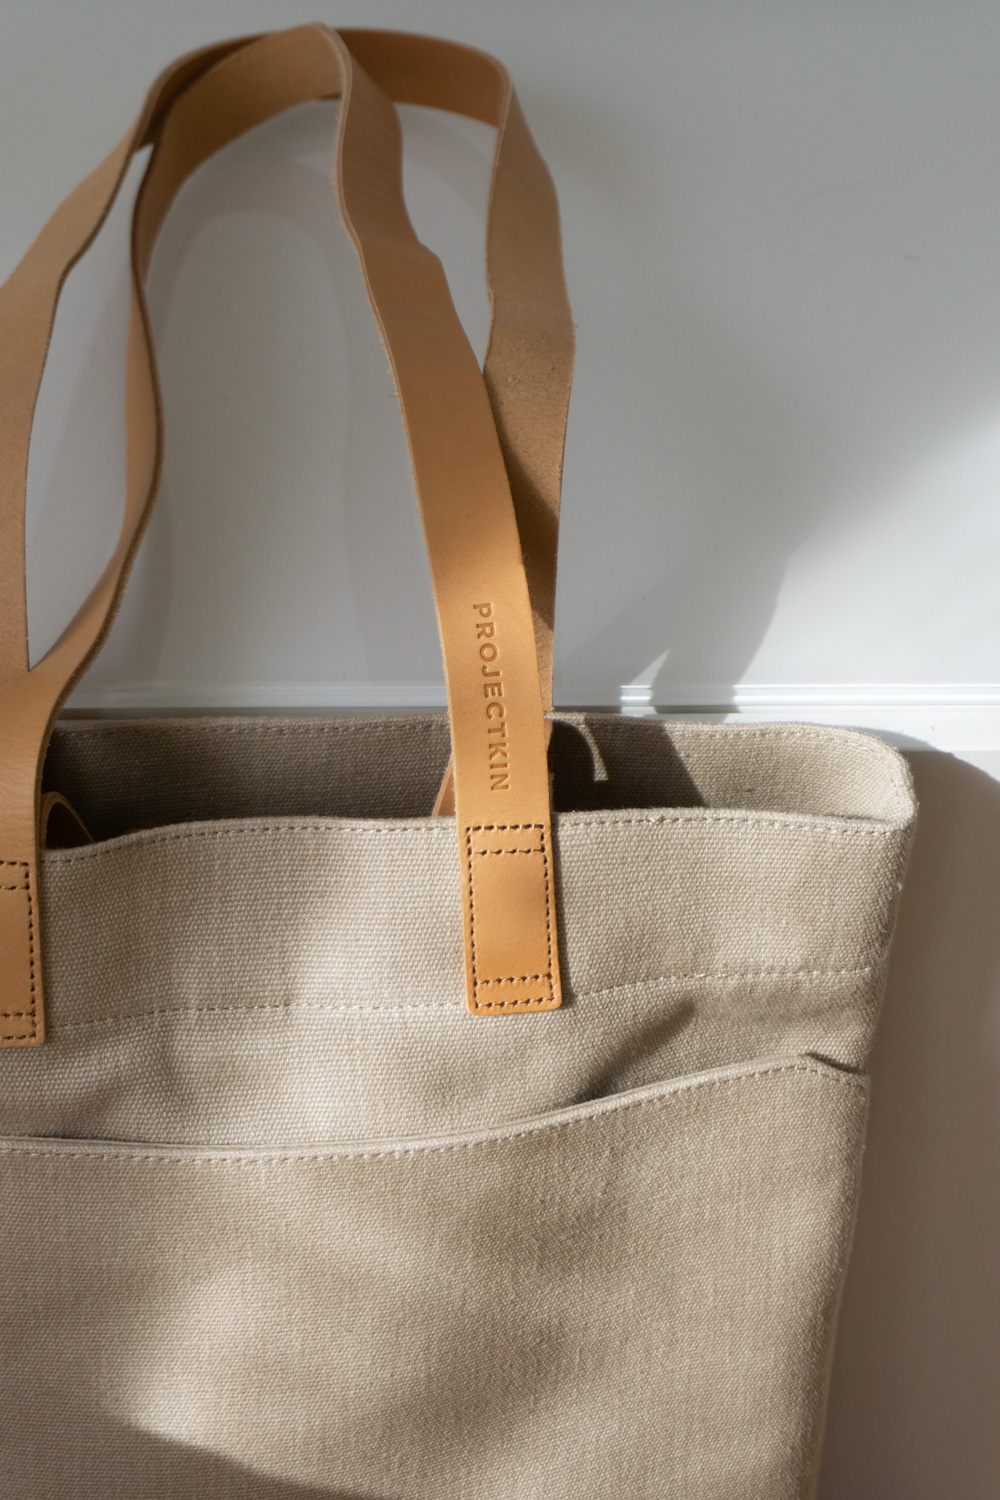 PROJECTKIN Travel Canvas Bag - Sustainable Luggage and travel accessories from eco friendly materials | Danish design, Scandinavian products, mindful accessories, luggage | product photography, shadows, light, minimalist aesthetic | RG Daily Blog